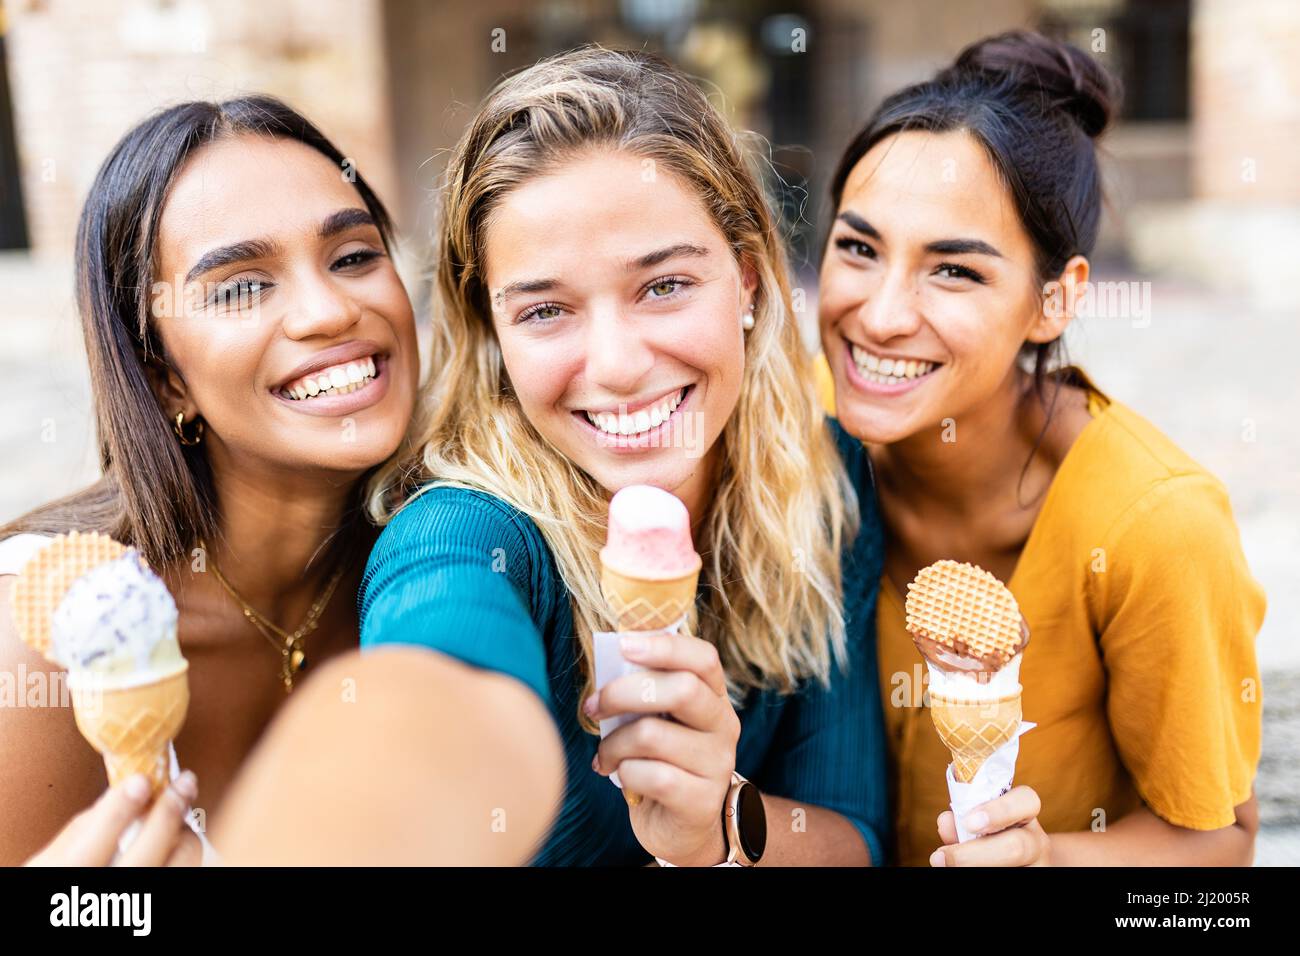 Diverse young women friends taking selfie together while eating an ice cream Stock Photo